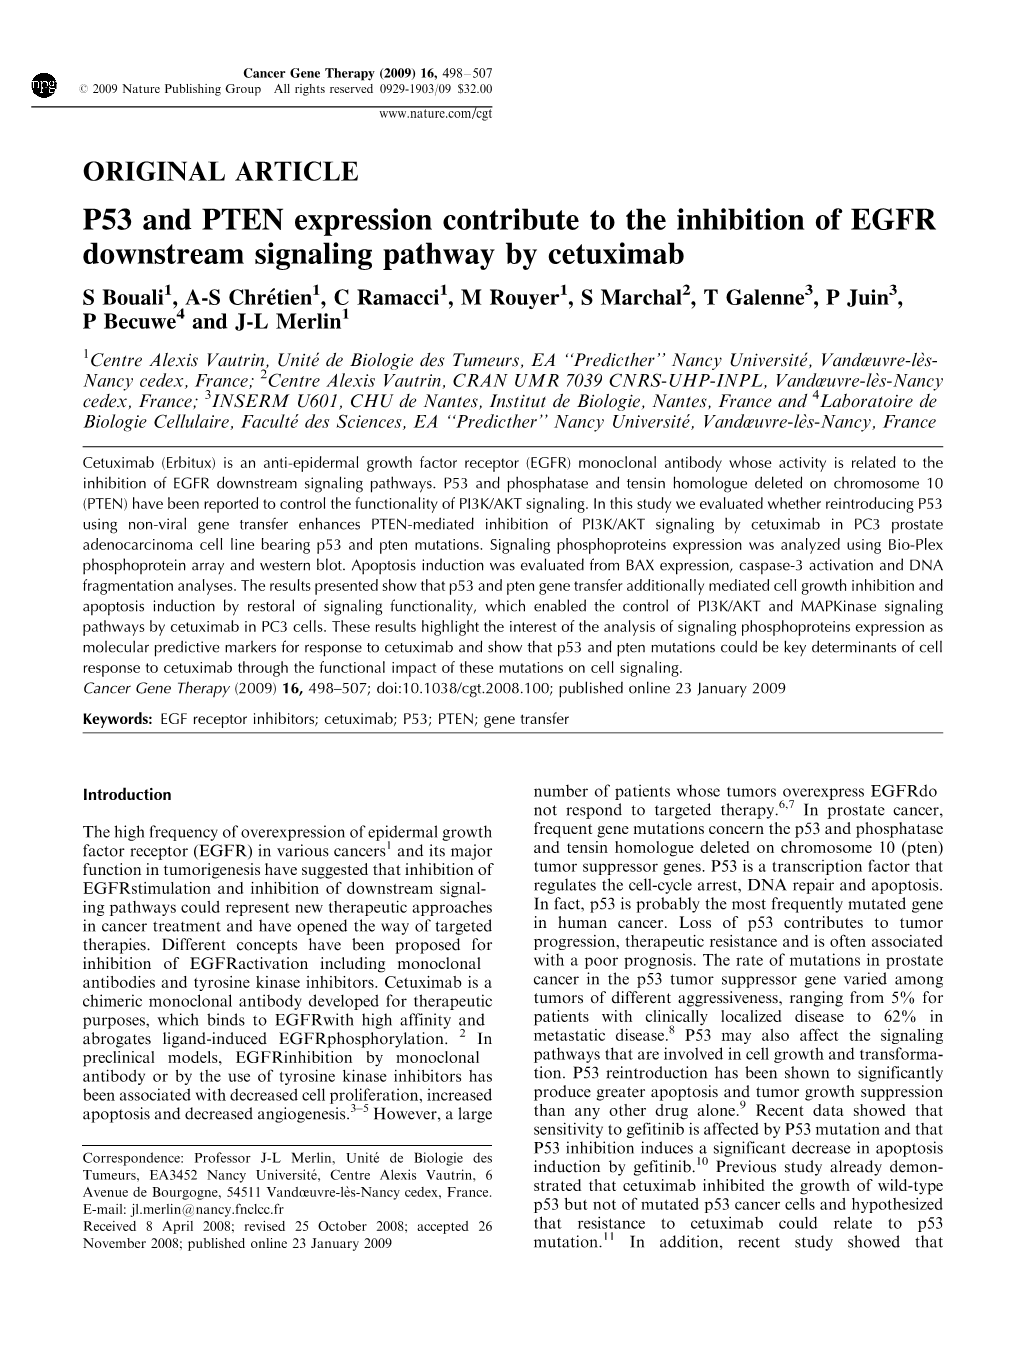 P53 and PTEN Expression Contribute to the Inhibition of EGFR Downstream Signaling Pathway by Cetuximab